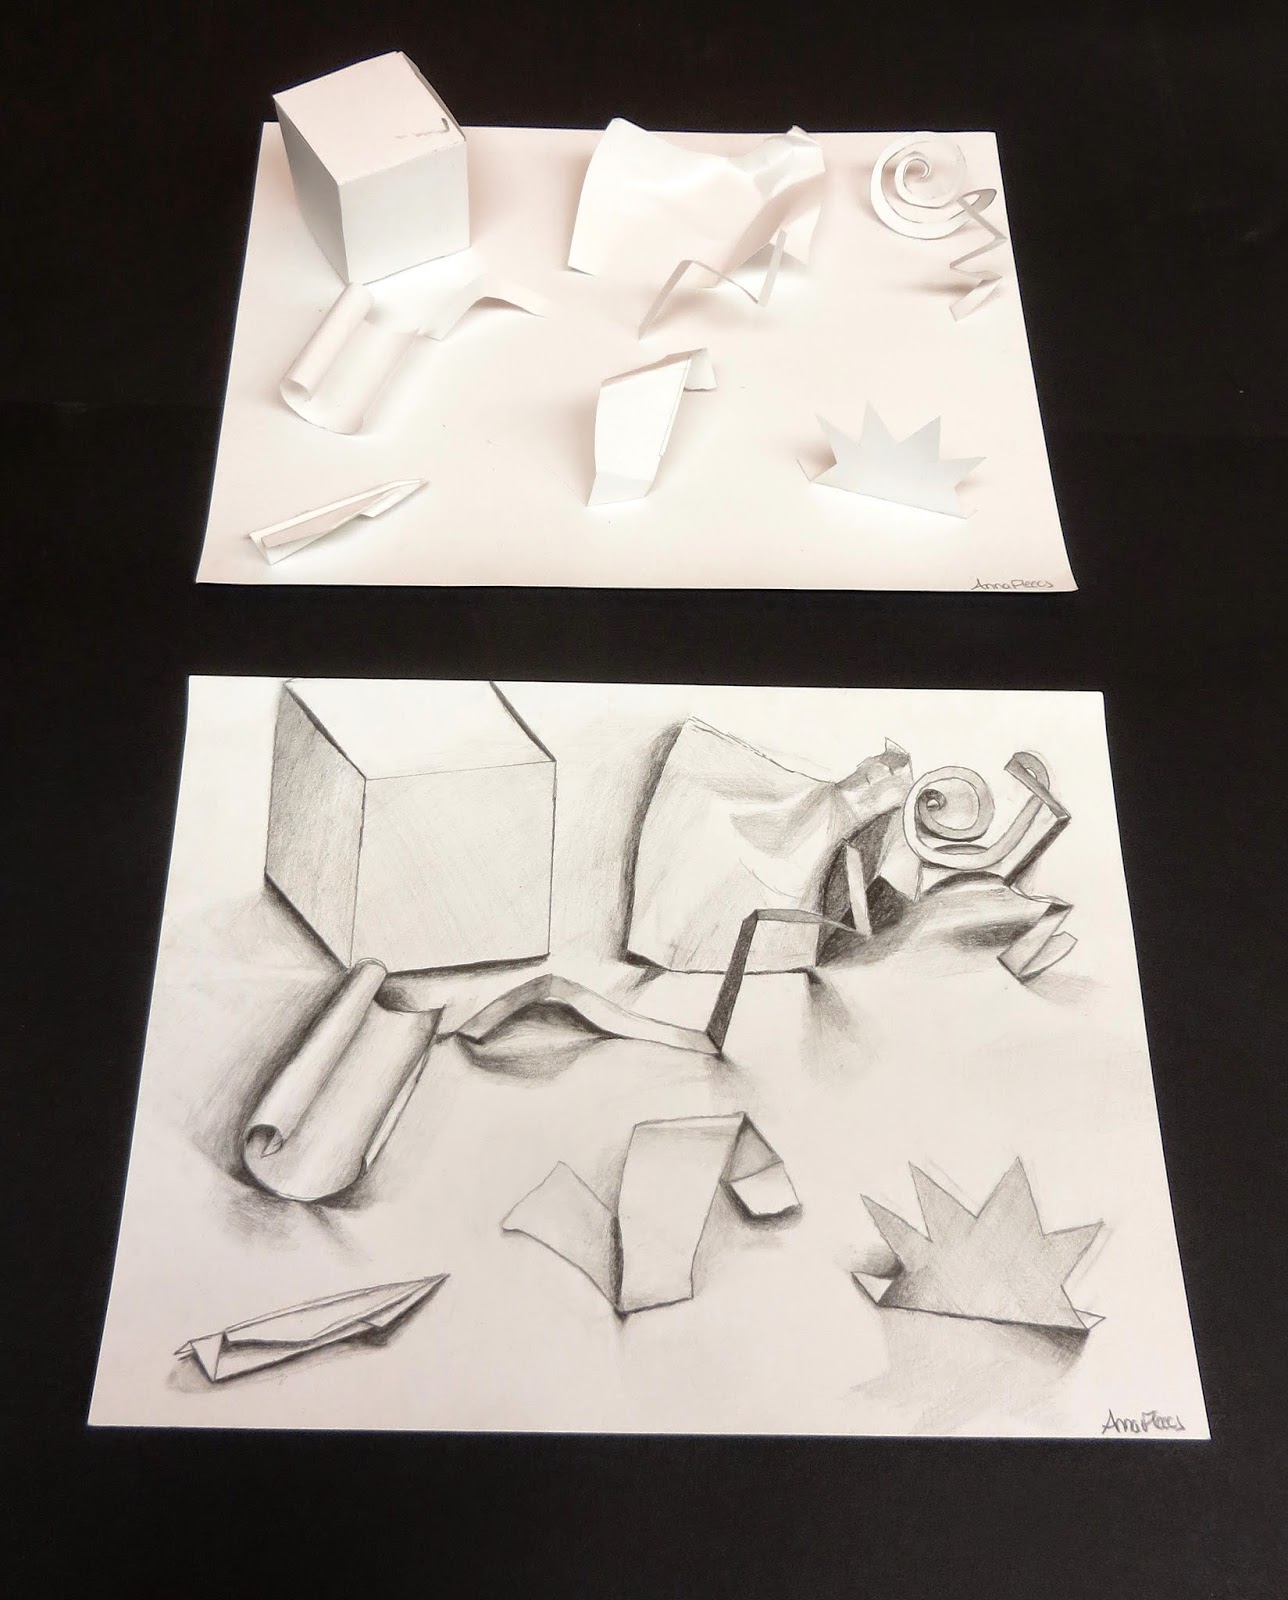 3 Amazing 3D Drawings On Paper, How To Draw 3D Art On Paper, 3D Drawings  on Paper